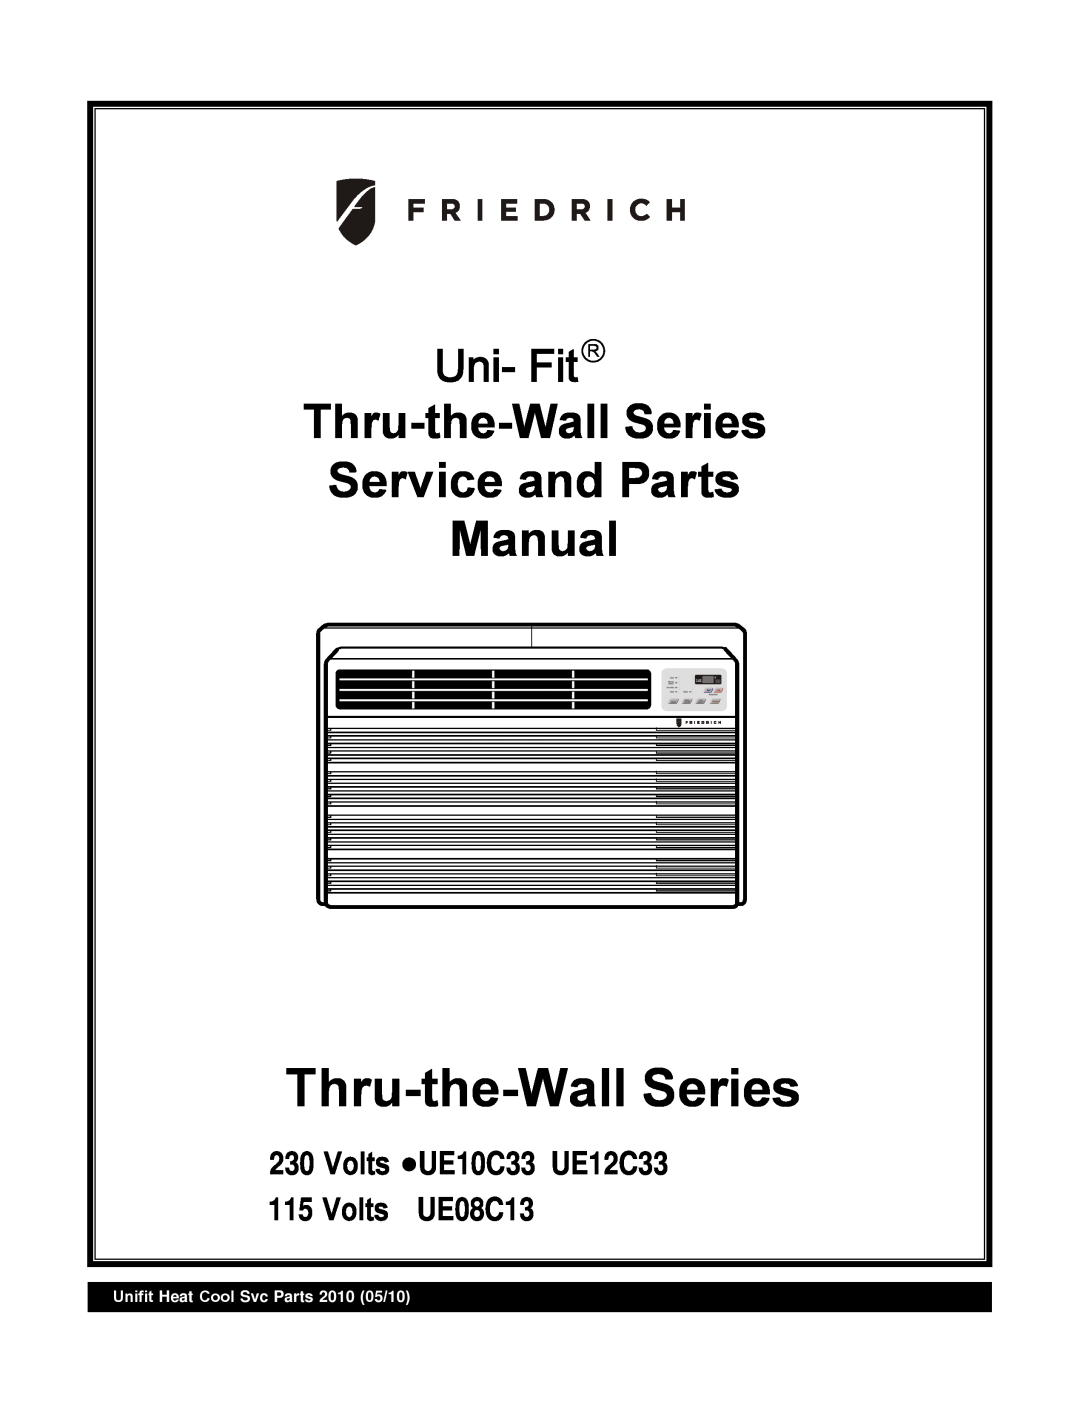 Friedrich UE10C33 manual Thru-the-WallSeries, Service and Parts Manual, Uni- Fit R, Unifit Heat Cool Svc Parts 2010 05/10 